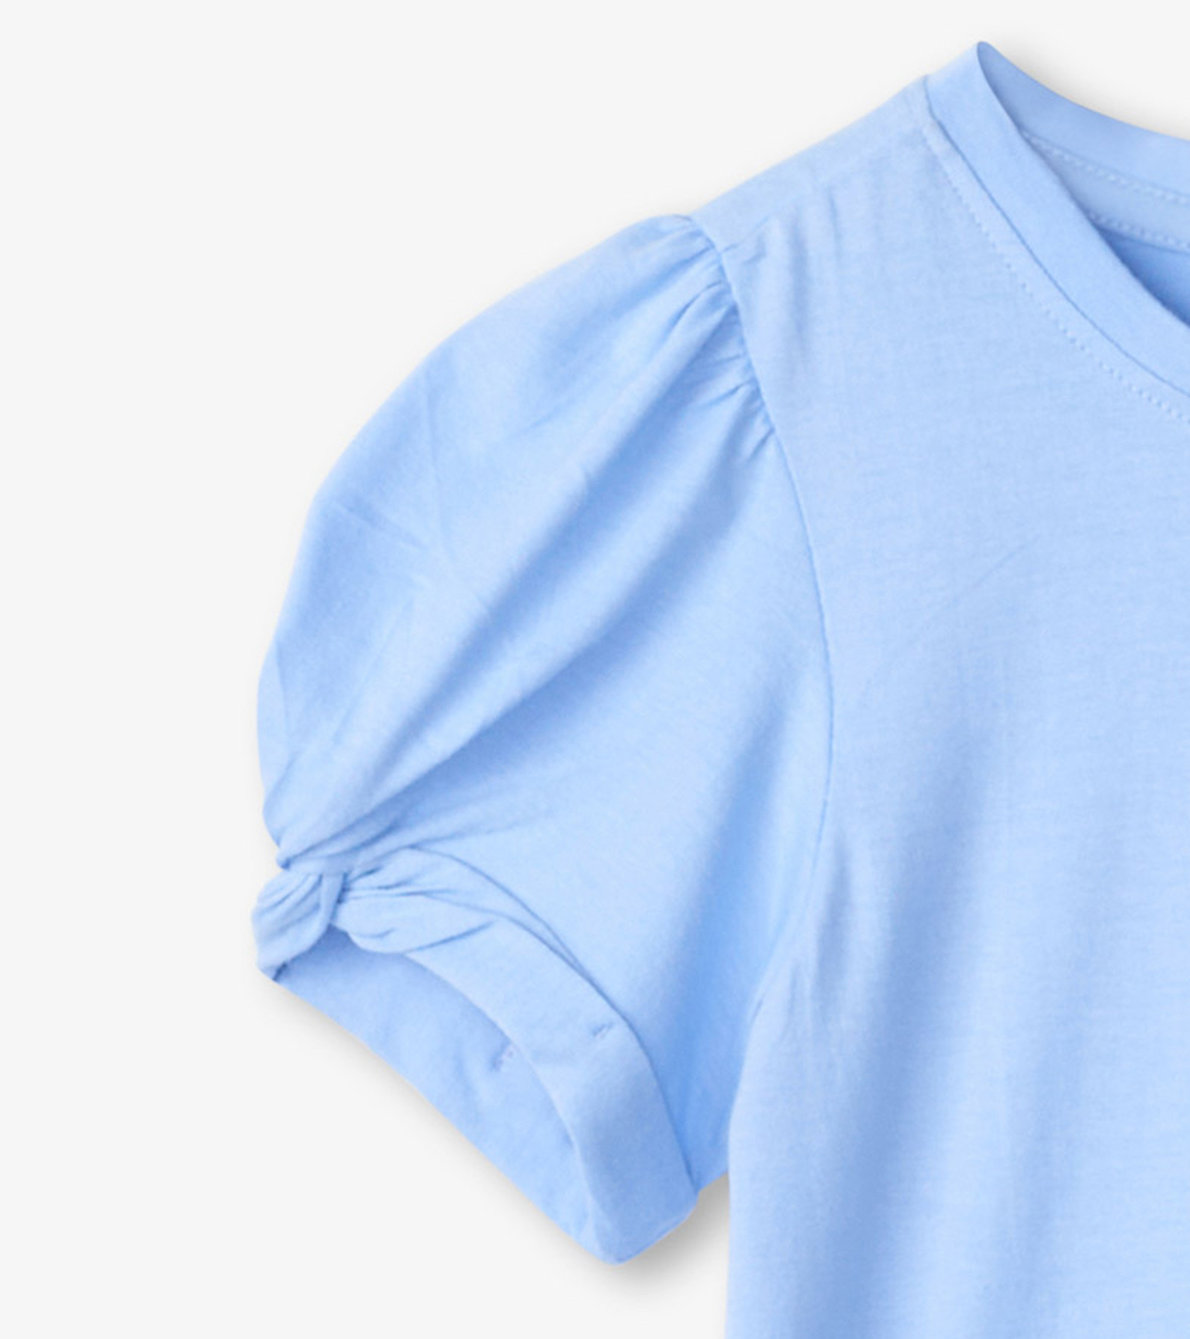 View larger image of Girls Vista Blue Twisted Sleeve Tee